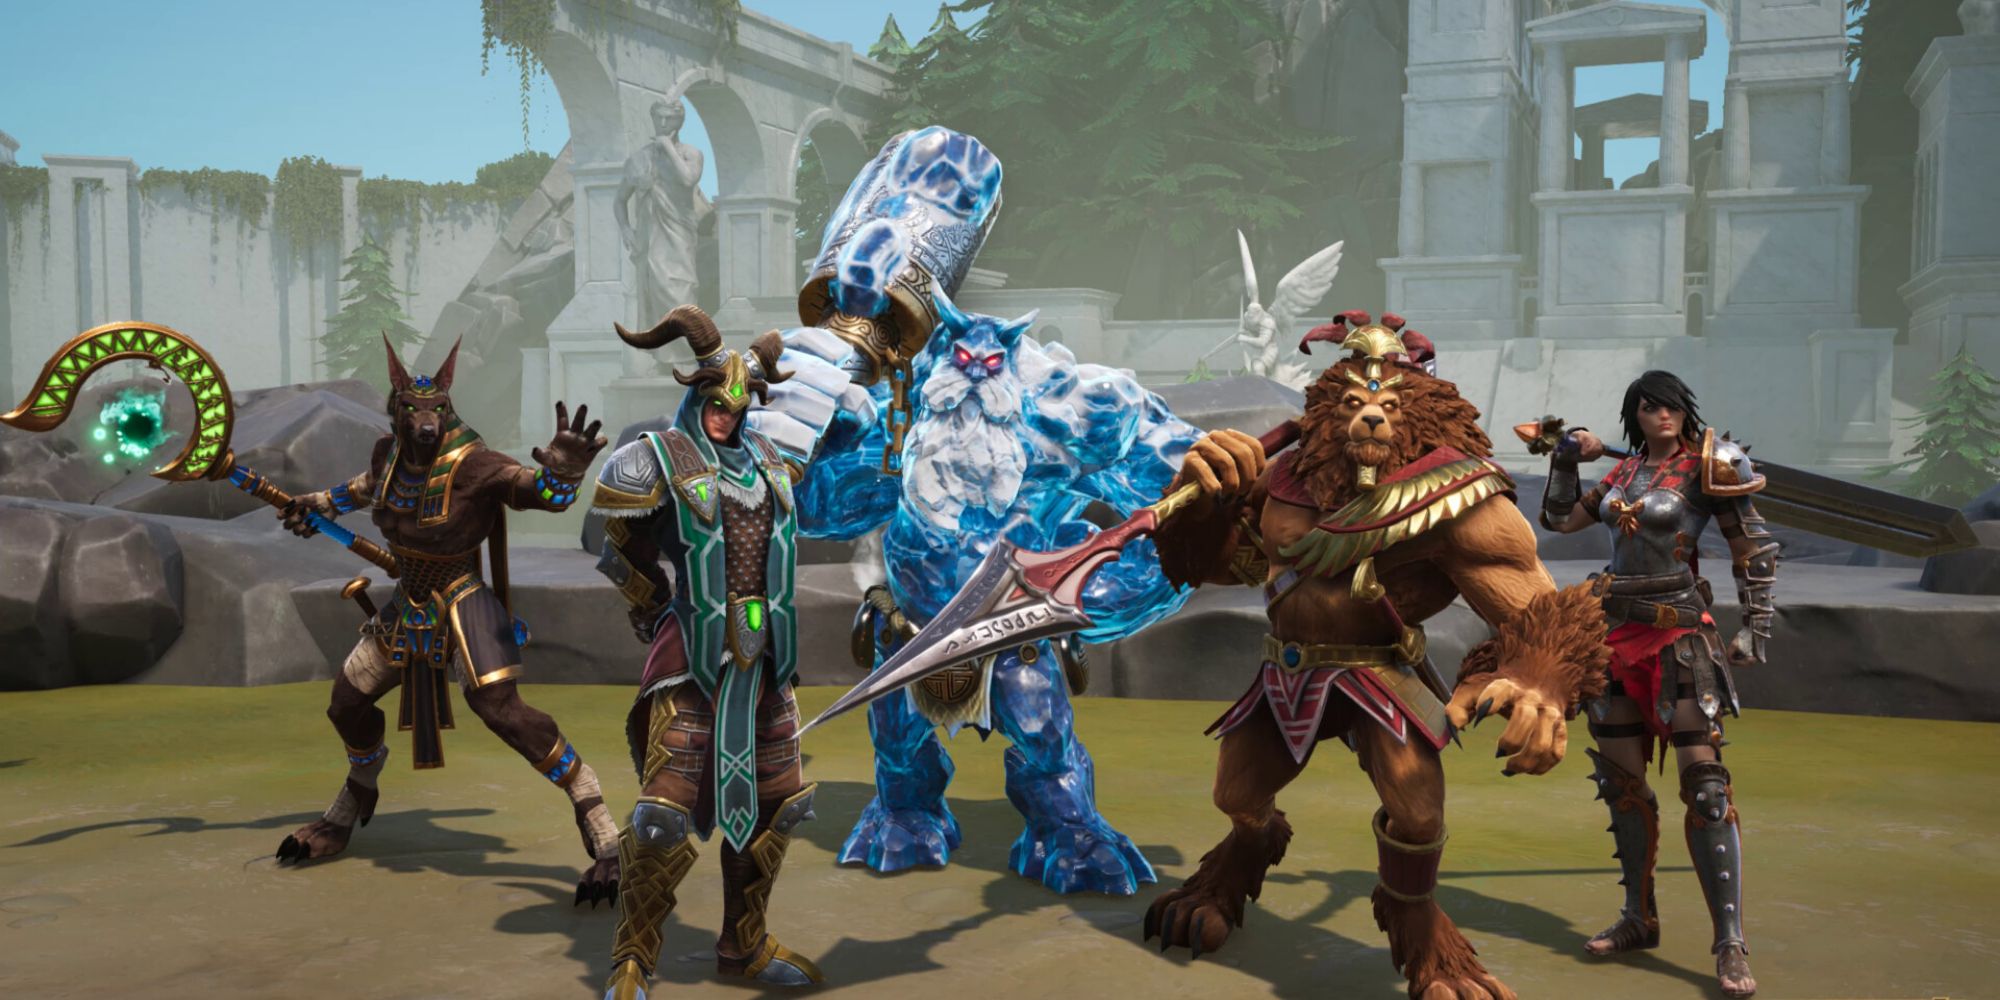 A lineup of gods from Smite 2, including Ymir, Loki, Anubis, and Bellona